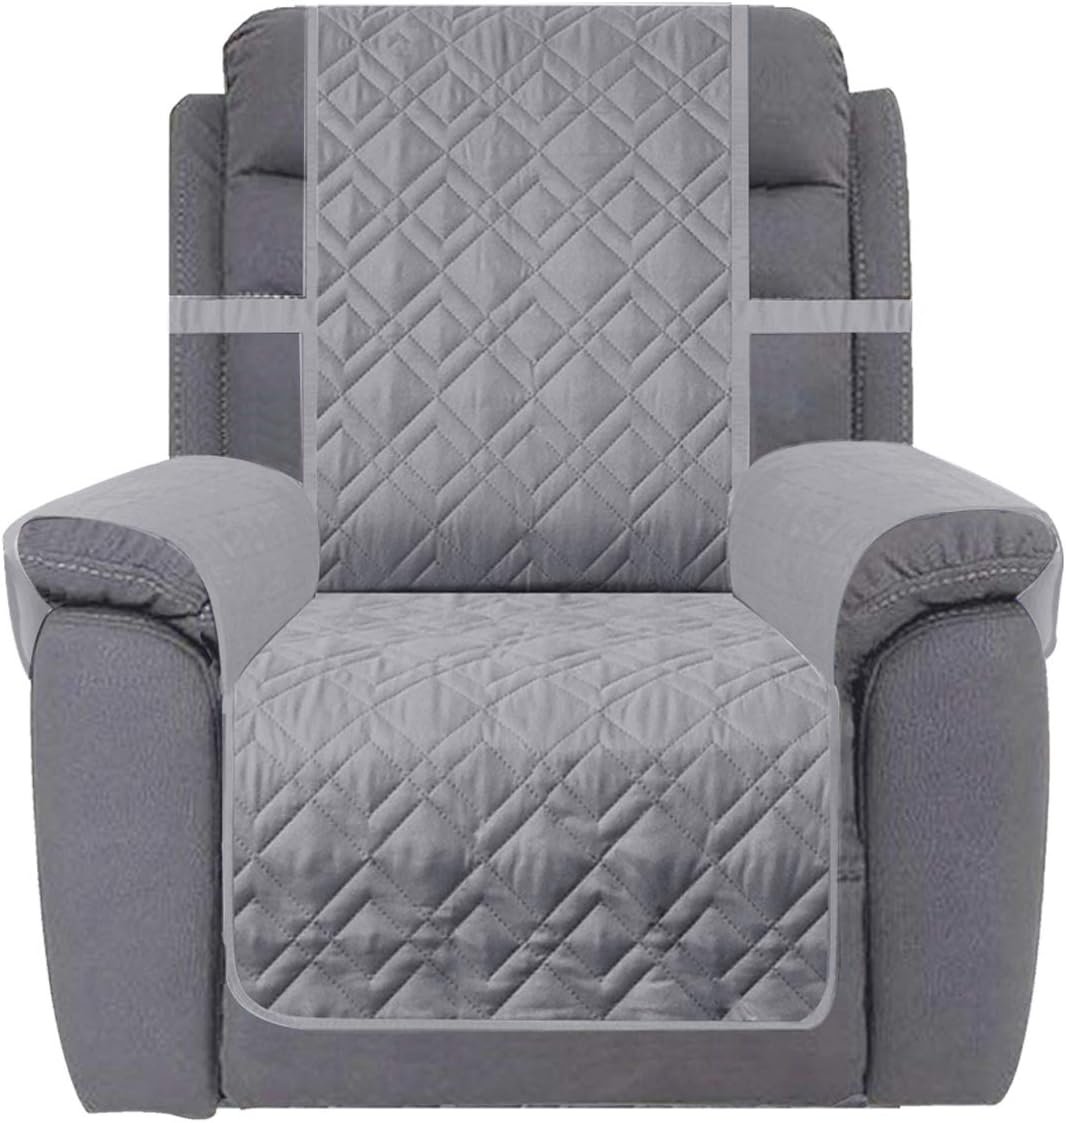 Ameritex Waterproof Nonslip Recliner Cover Stay in Place, Dog Chair Cover Furniture Protector, Ideal Recliner Slipcovers for Pets and Kids (23, Light Grey)